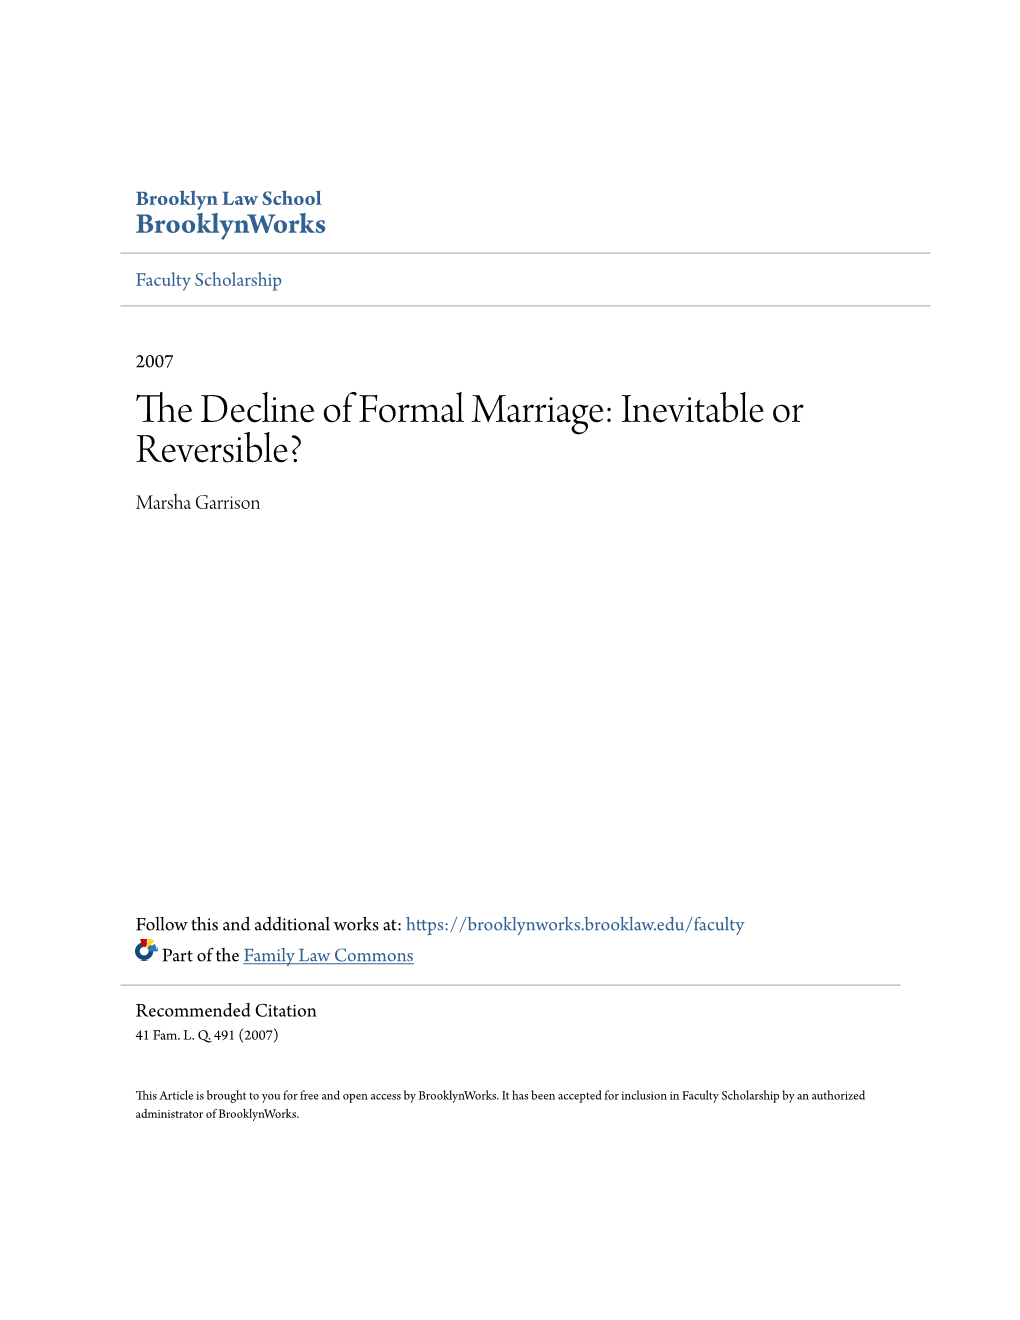 The Decline of Formal Marriage: Inevitable Or Reversible?